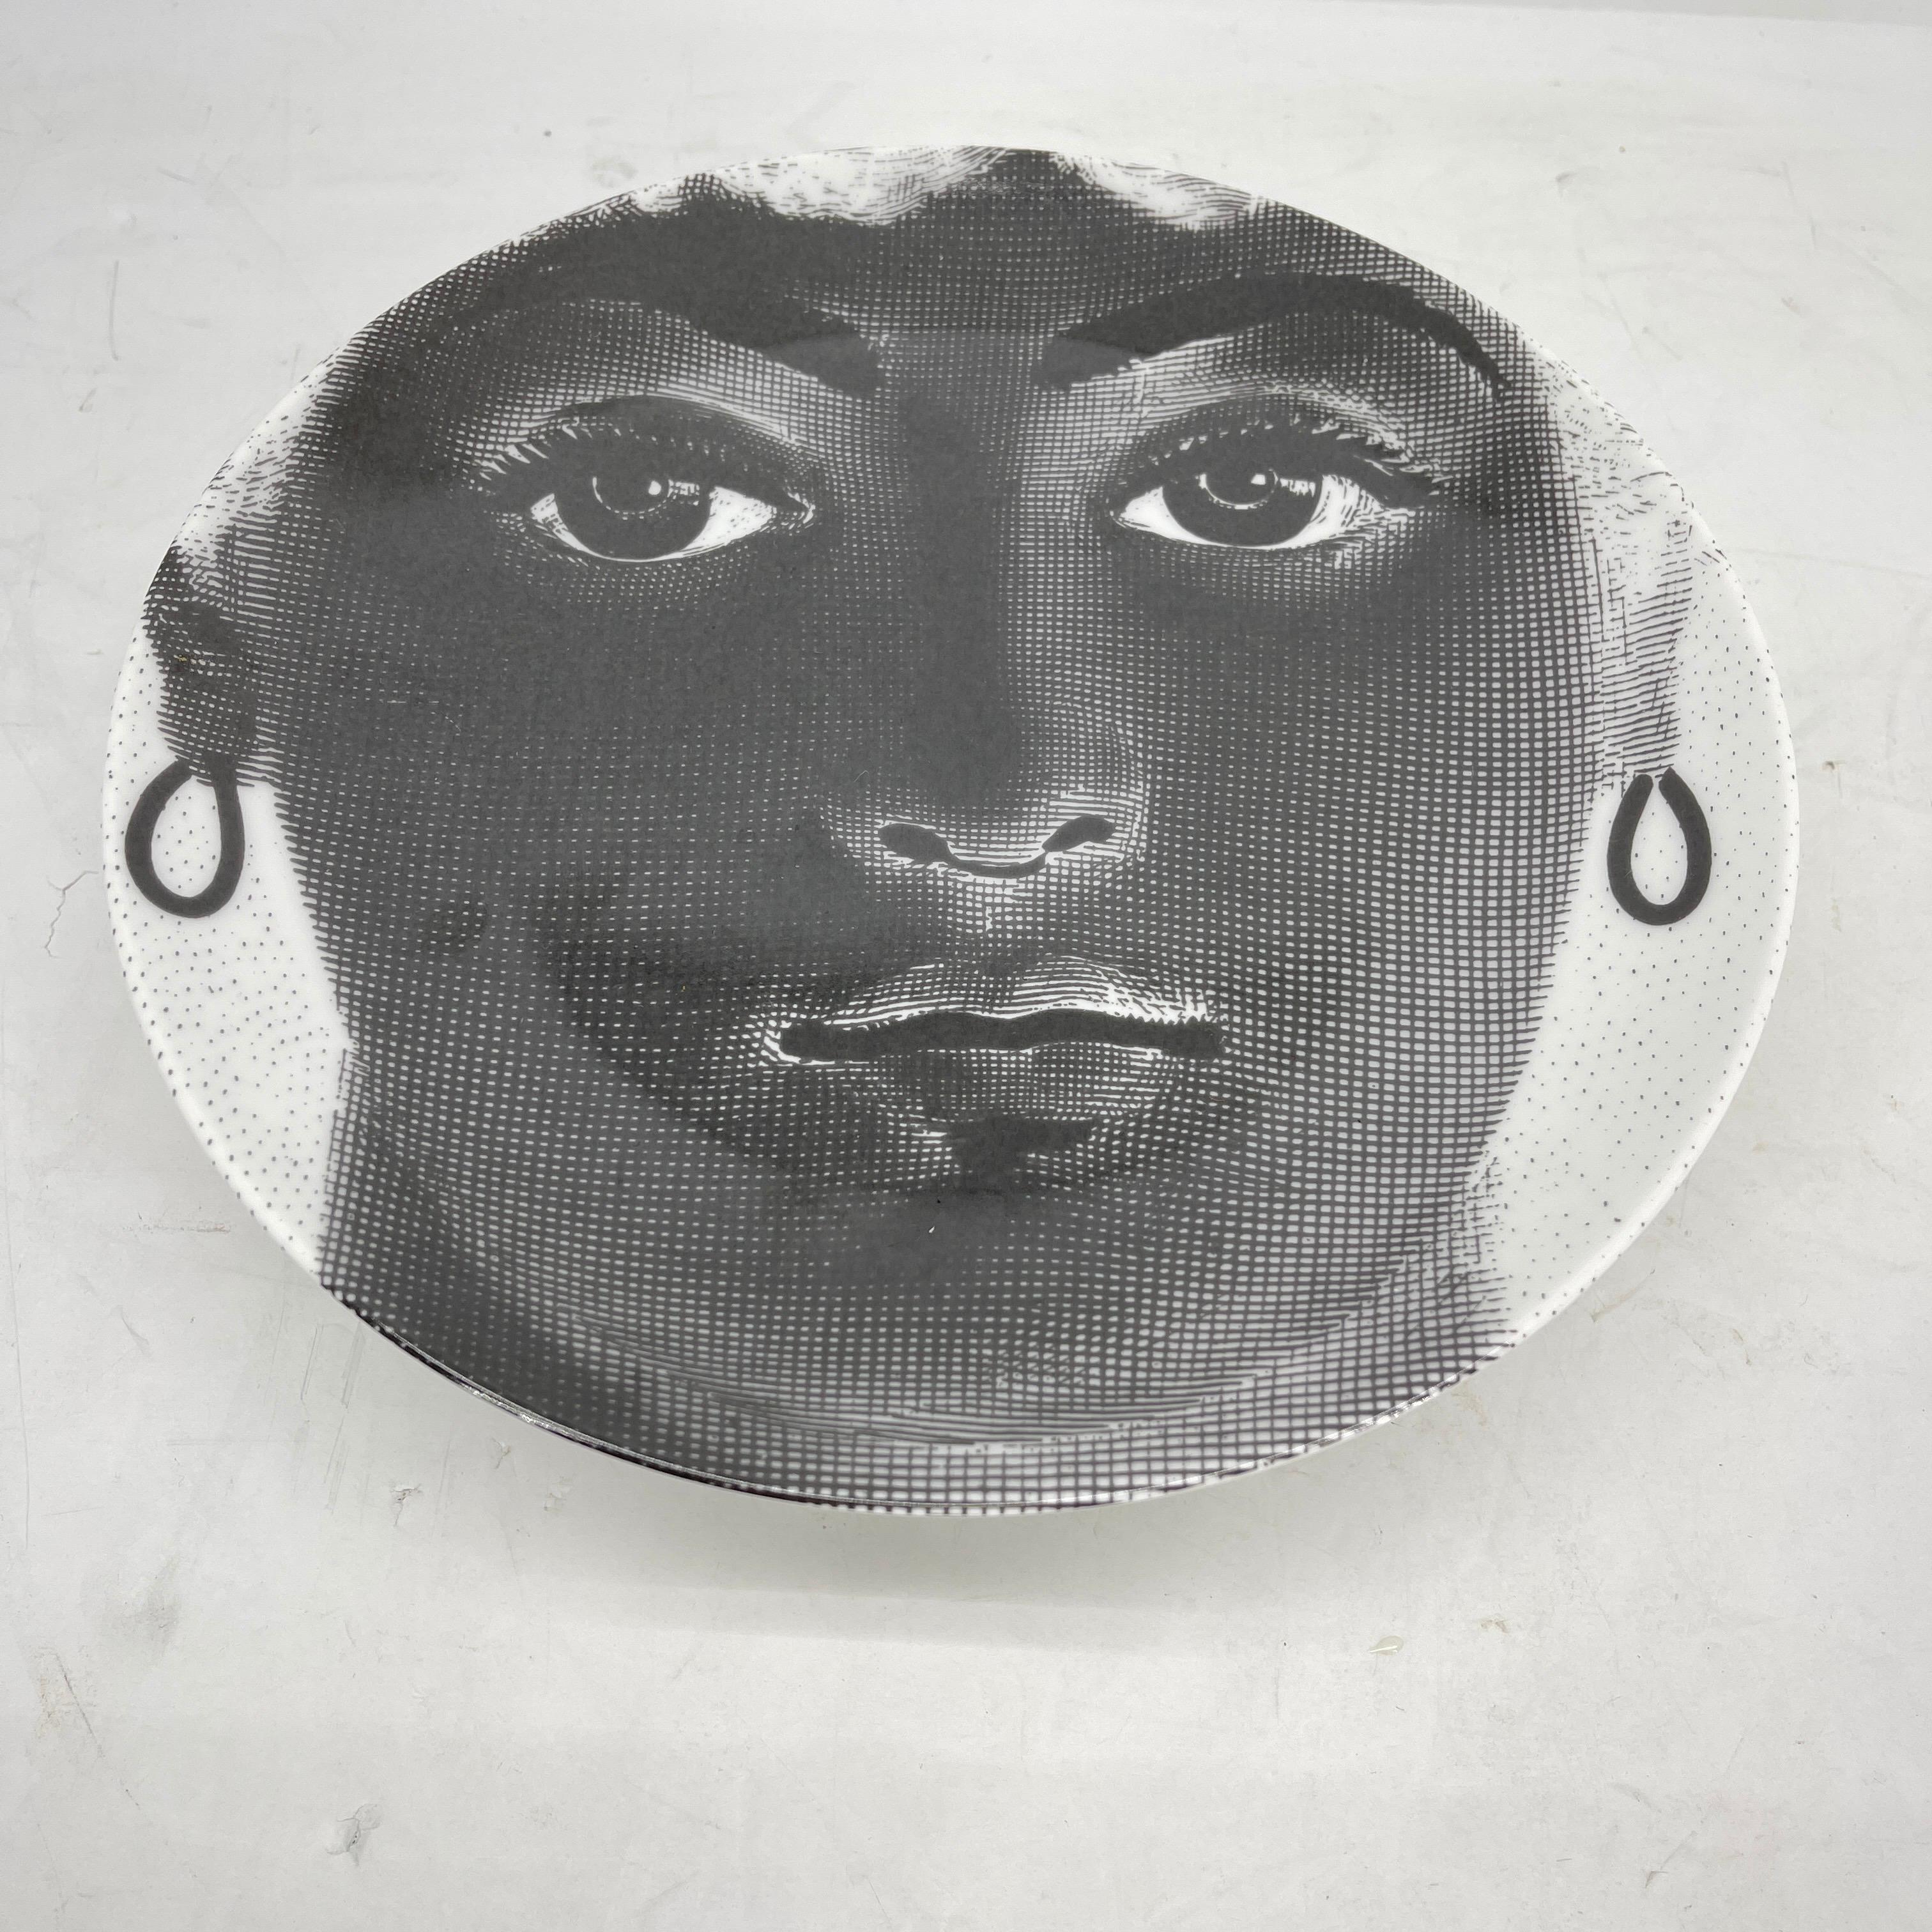 Piero Fornasetti Tema e Variazioni Porcelain Black and White Large Dish Charger For Sale 2